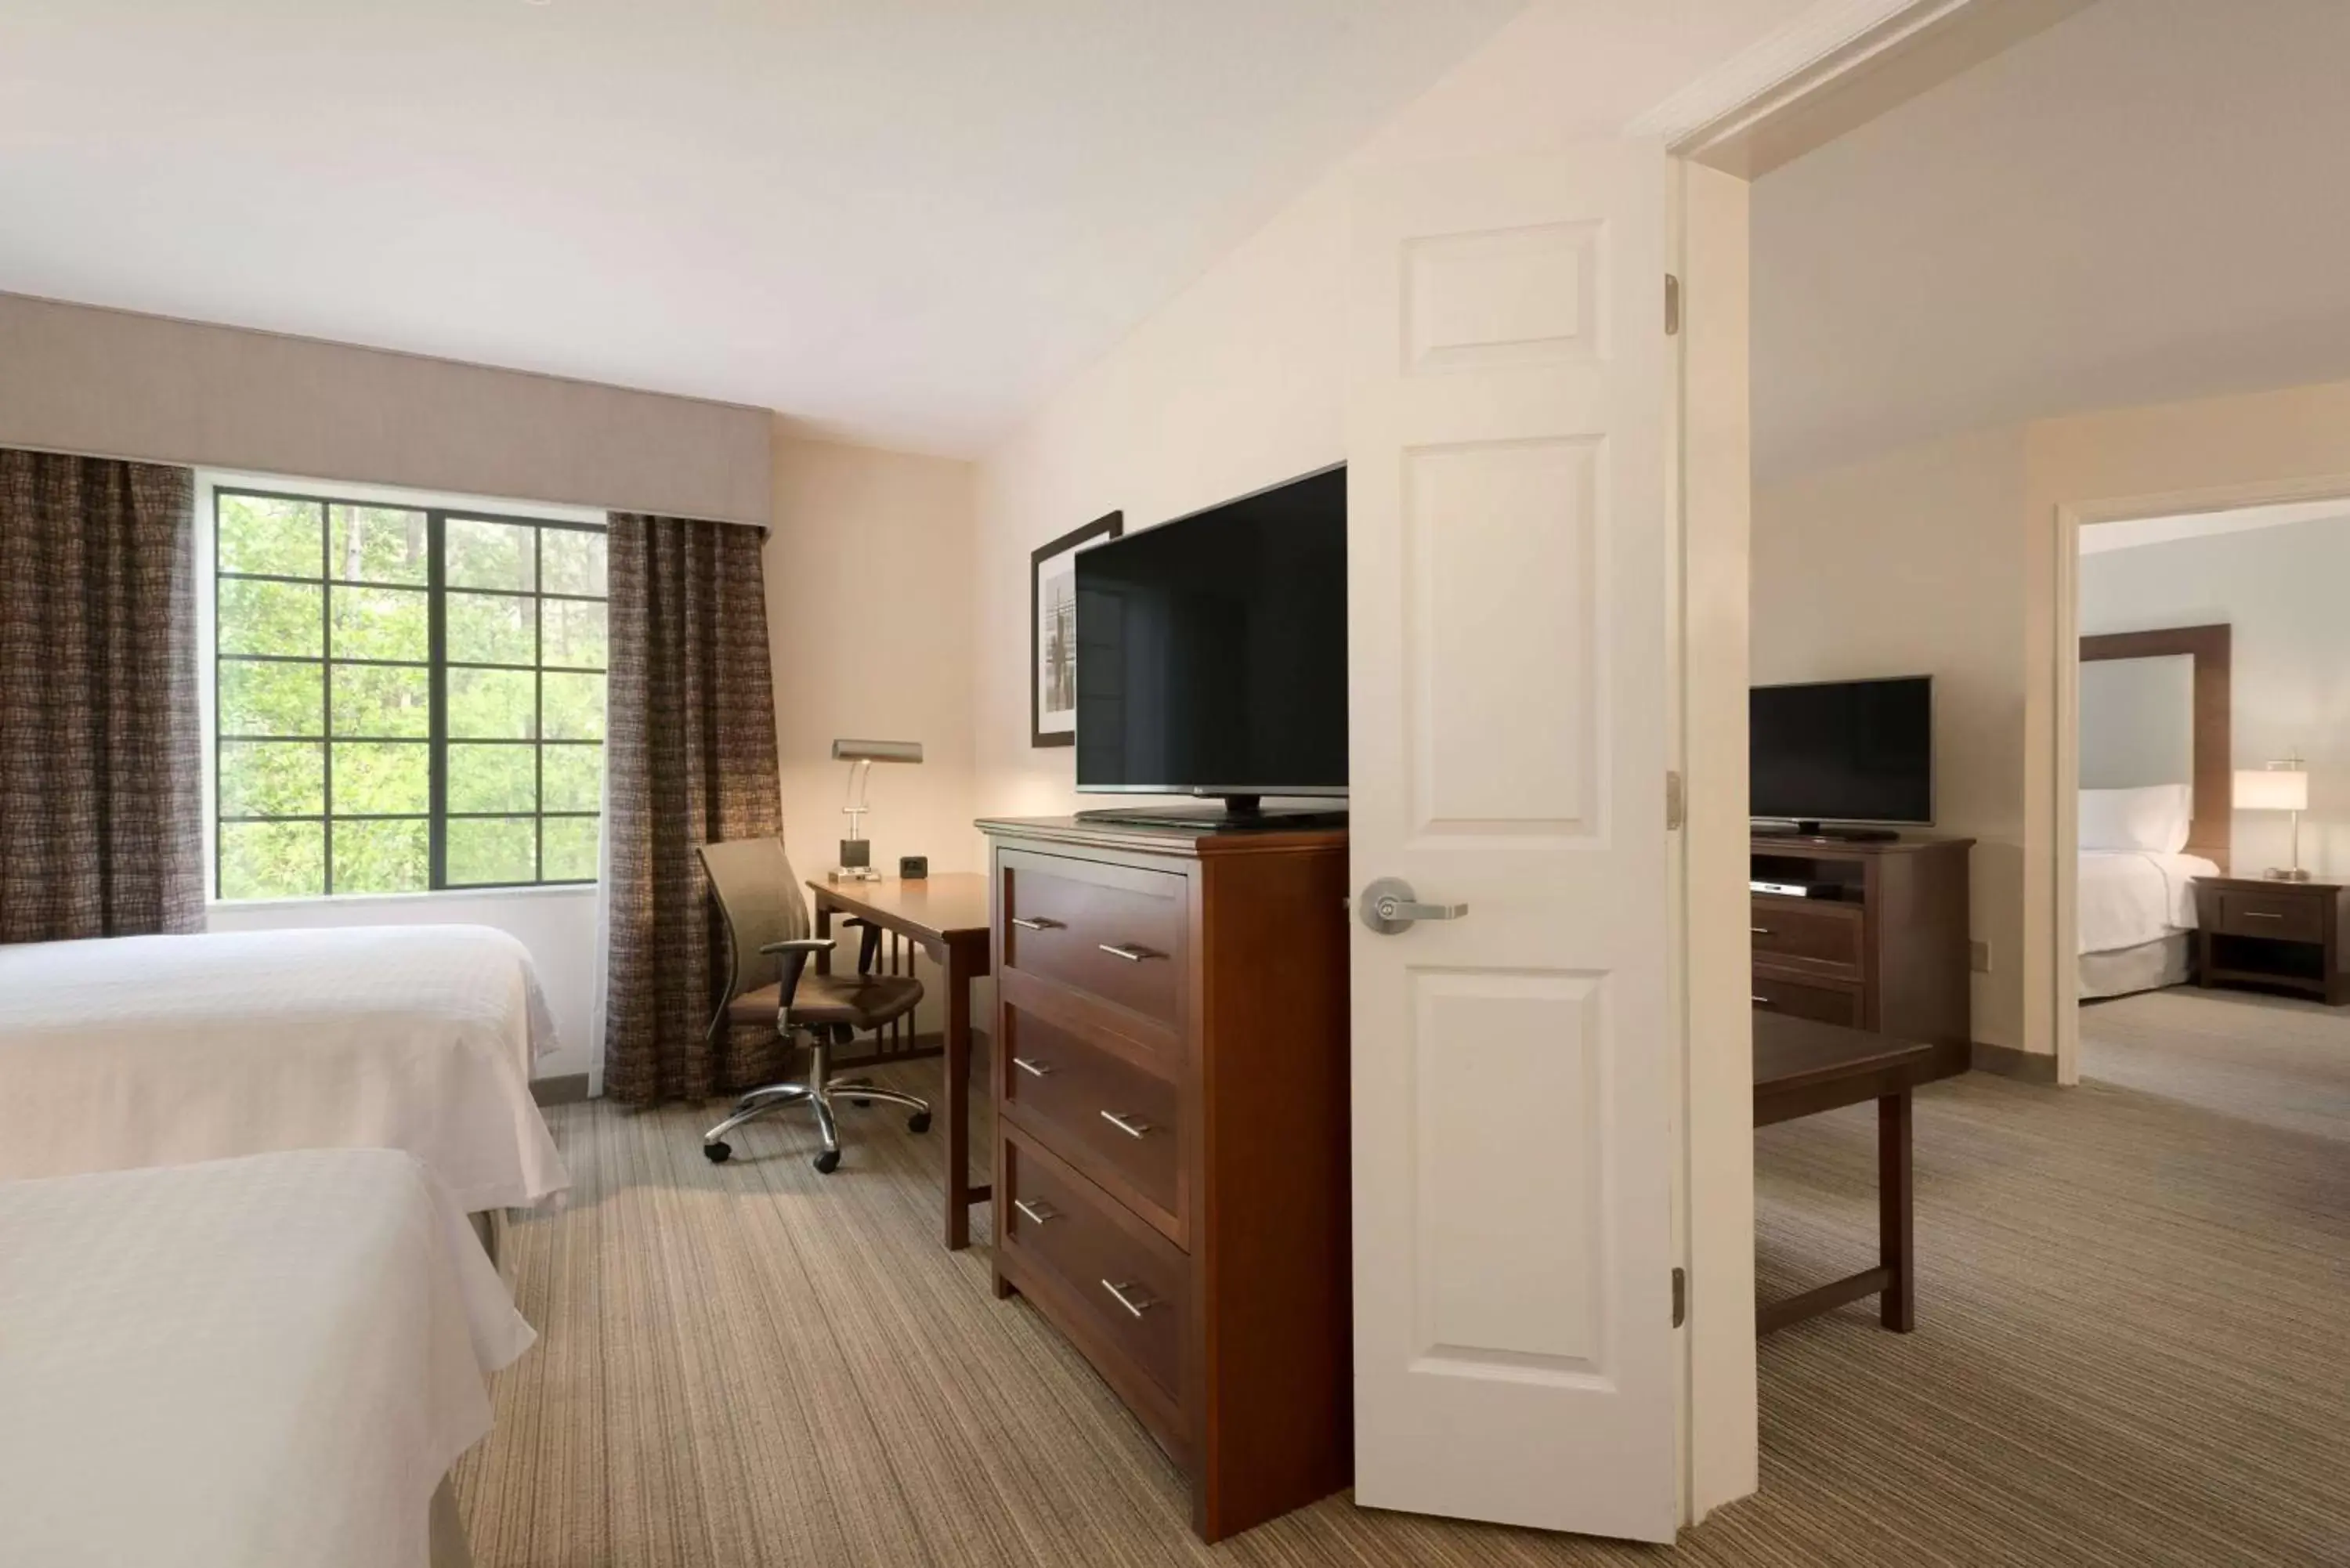 Two-Bedroom Suite with One King Bed and Two Queen Beds in Homewood Suites Jacksonville Deerwood Park